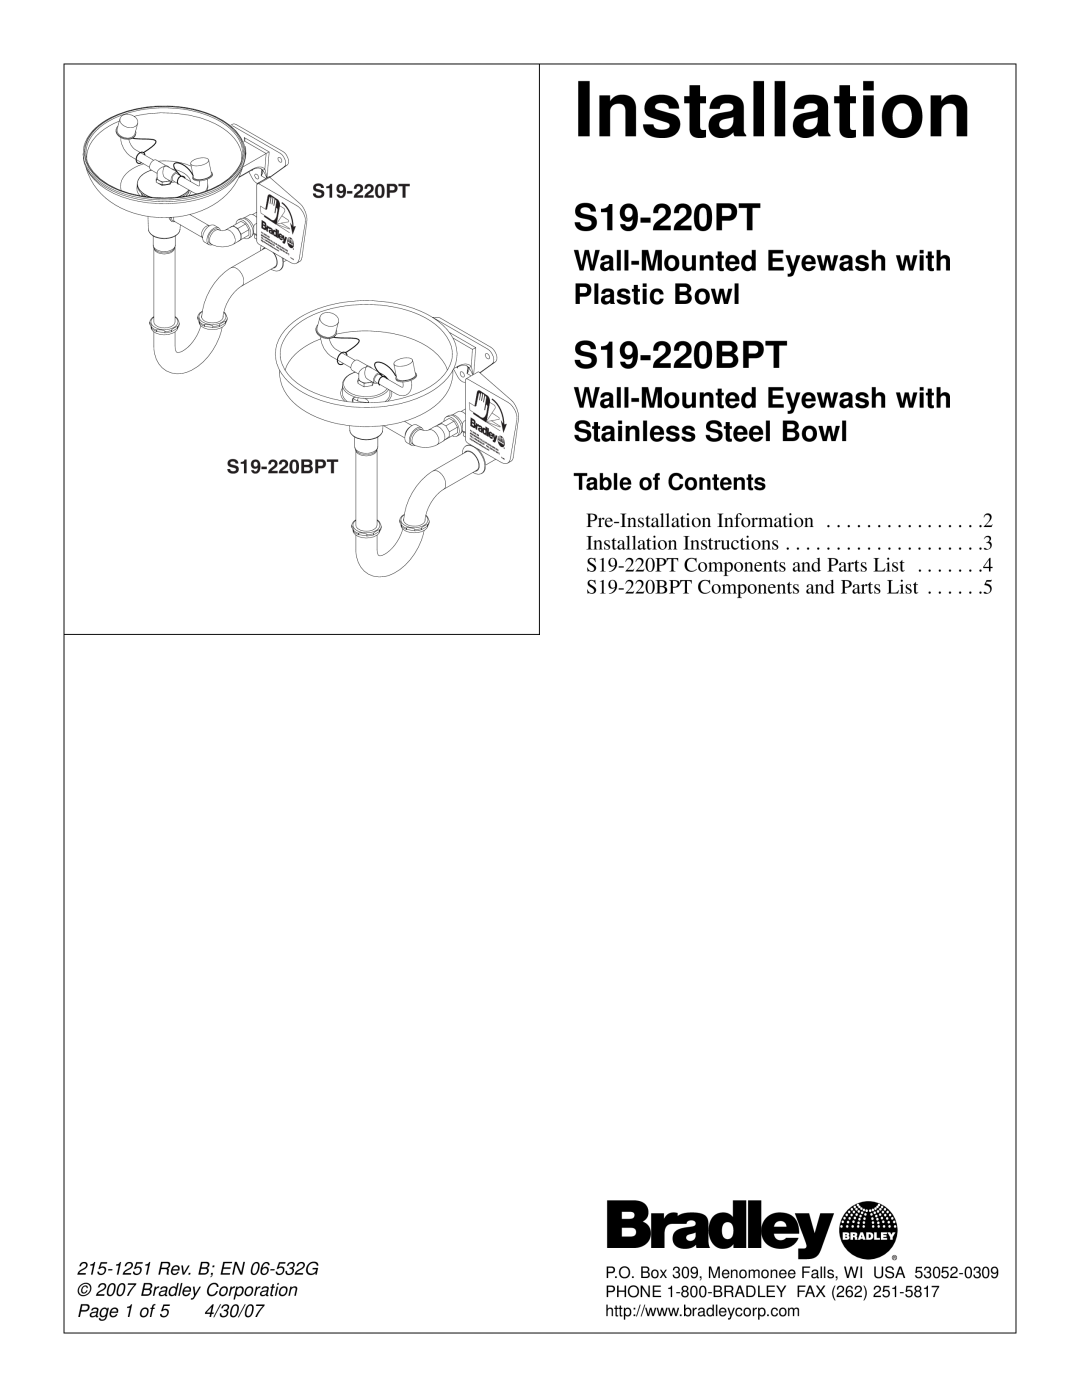 Bradley Smoker S19-220PT installation instructions Wall-Mounted Eyewash with, Plastic Bowl, Stainless Steel Bowl, 4/30/07 